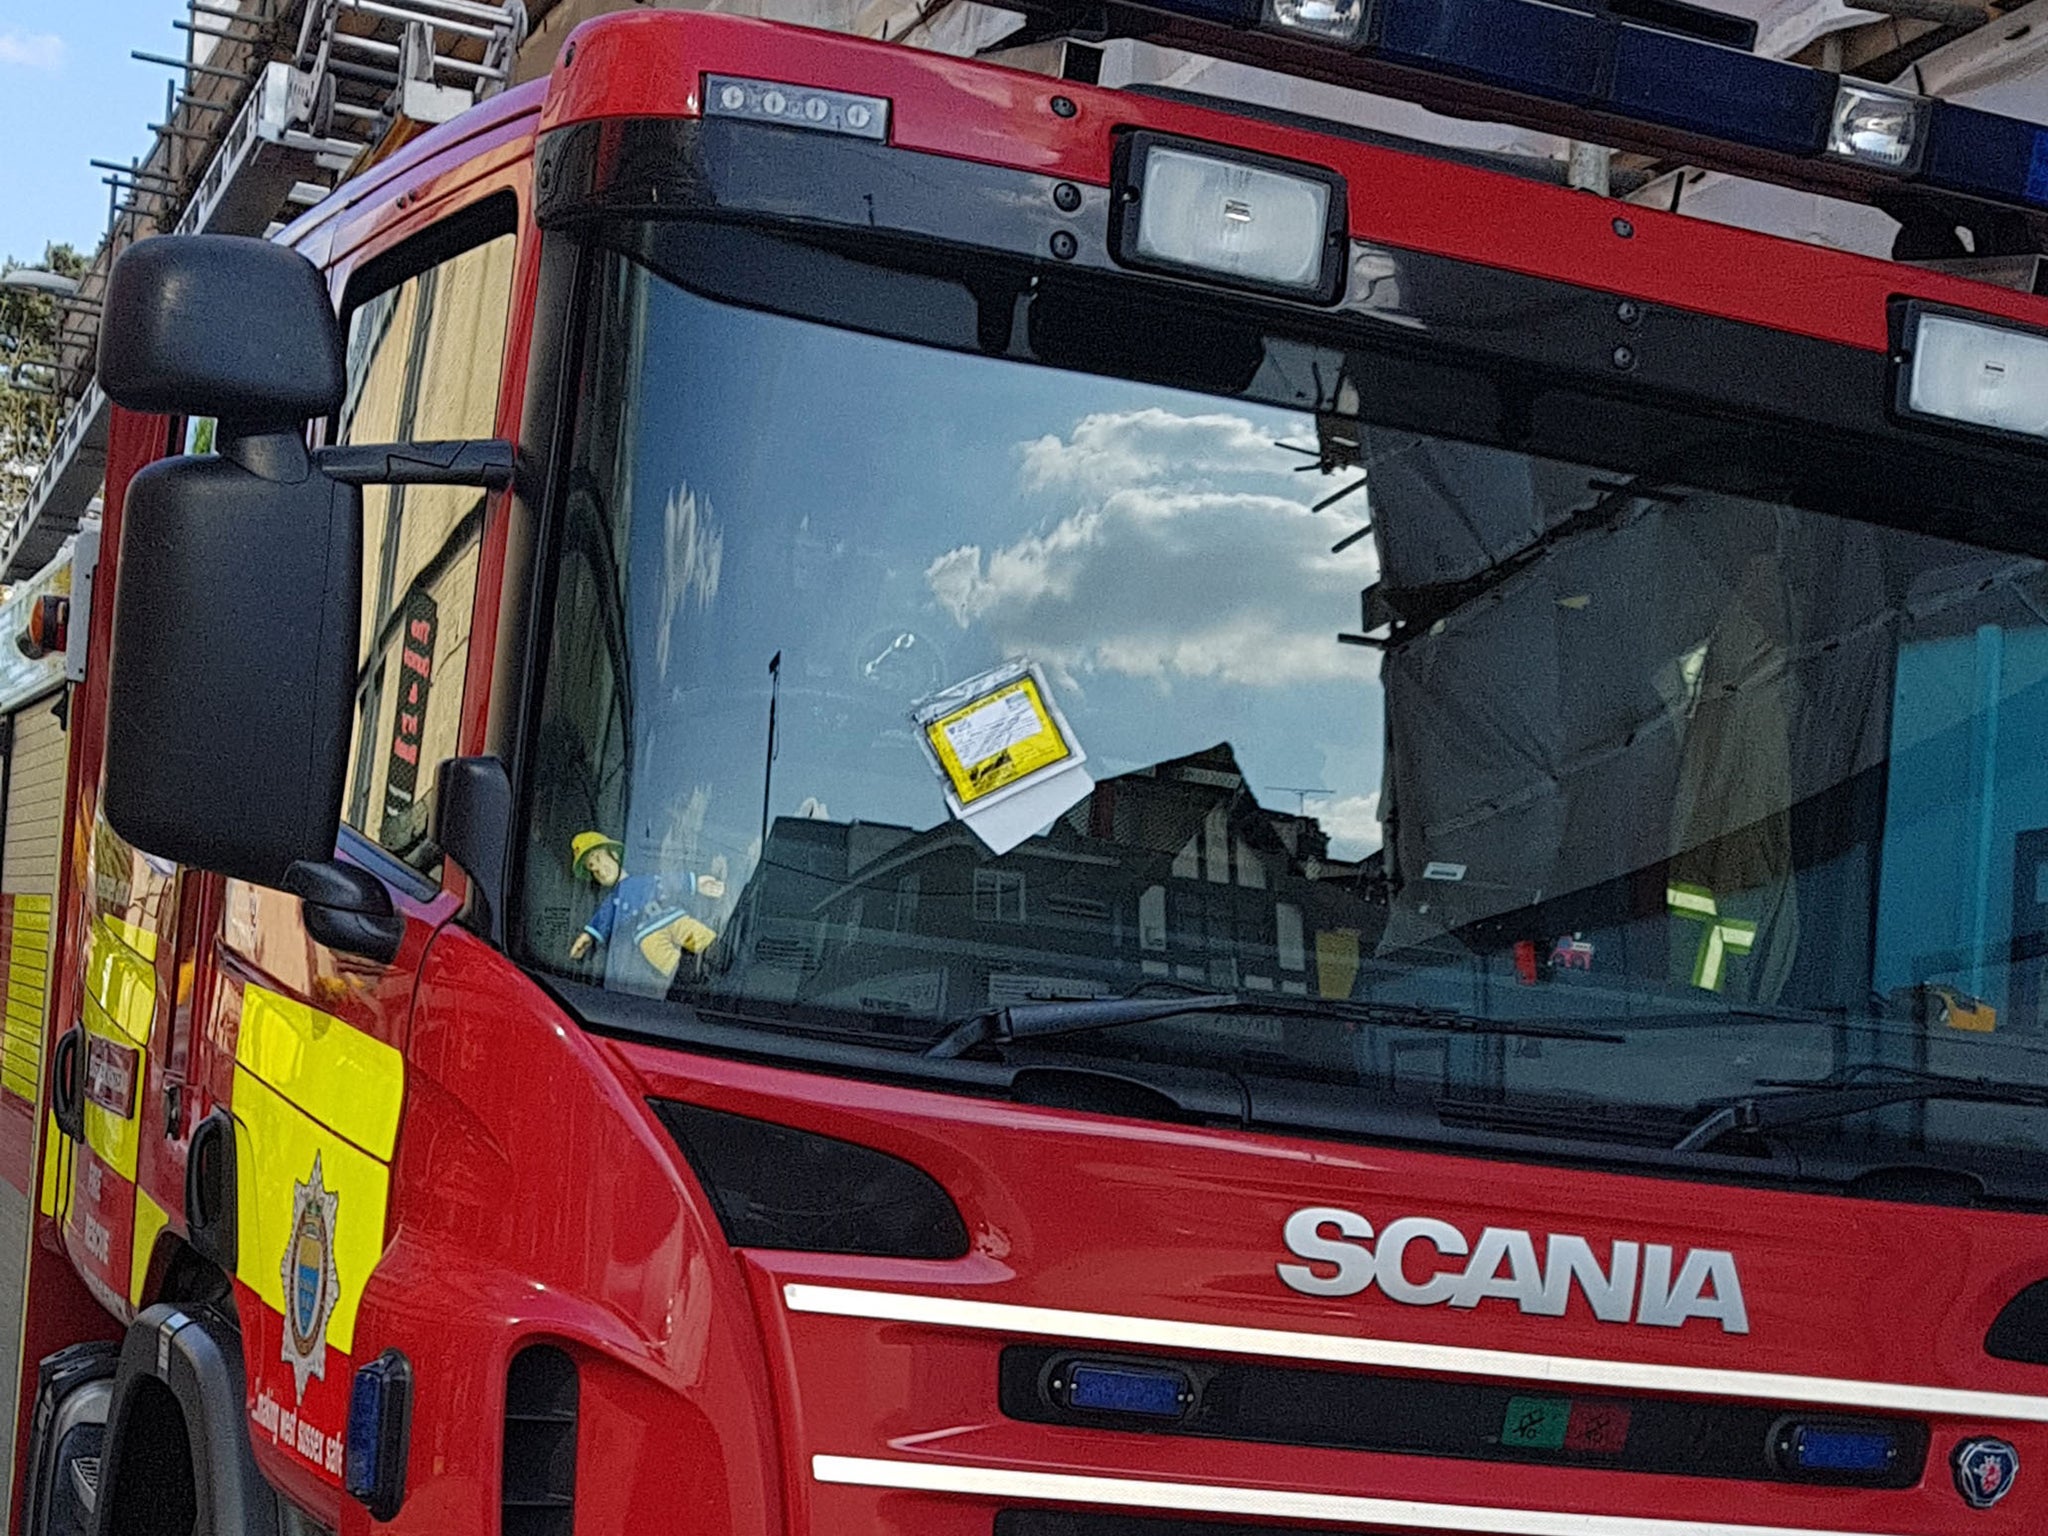 After photos of the yellow ticket placed on the engine were shared online and sparked fury, Mid Sussex District said the fine was being withdrawn